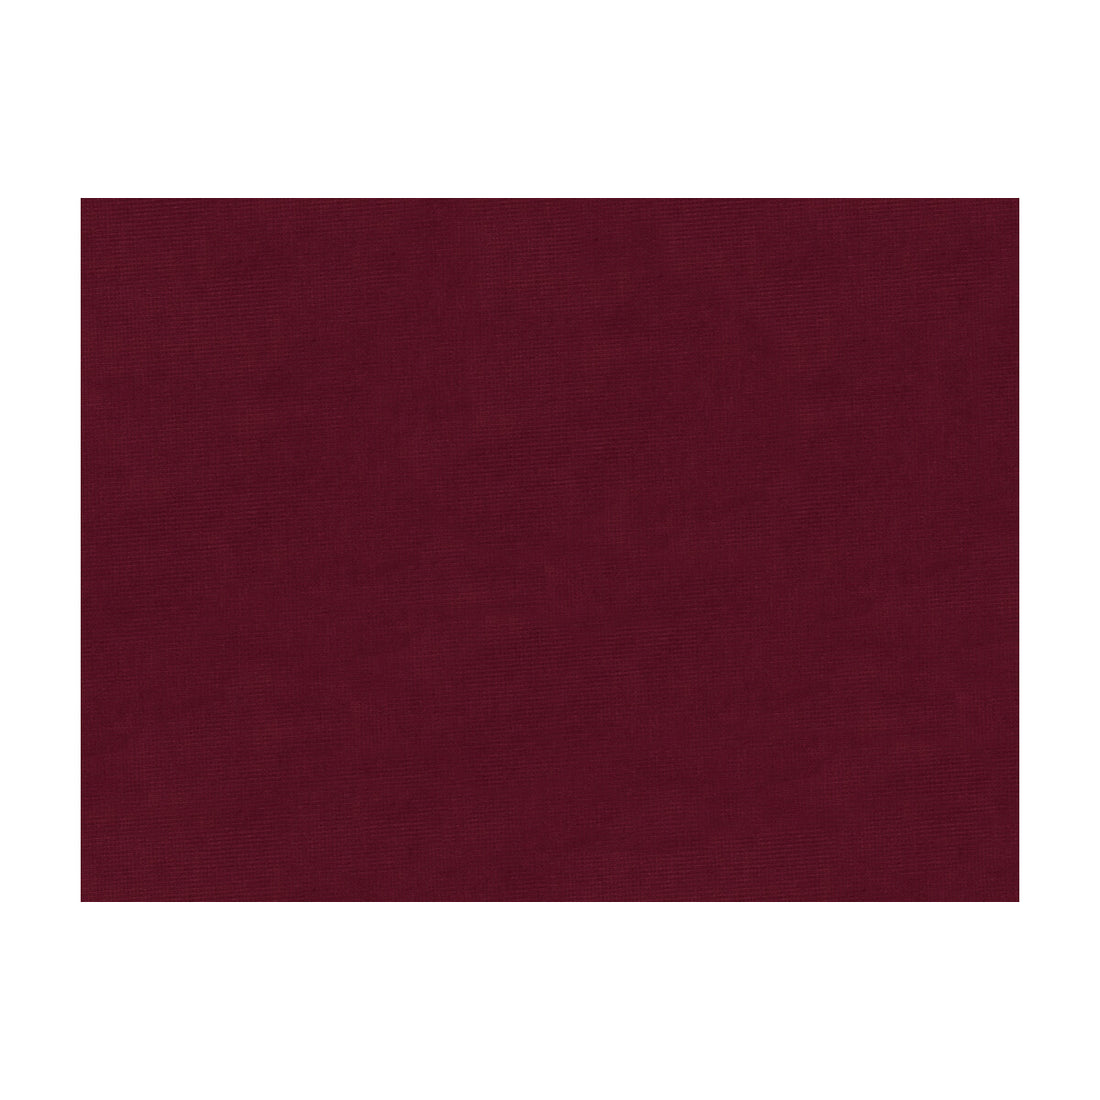 Charmant Velvet fabric in wine color - pattern 8013150.9.0 - by Brunschwig &amp; Fils